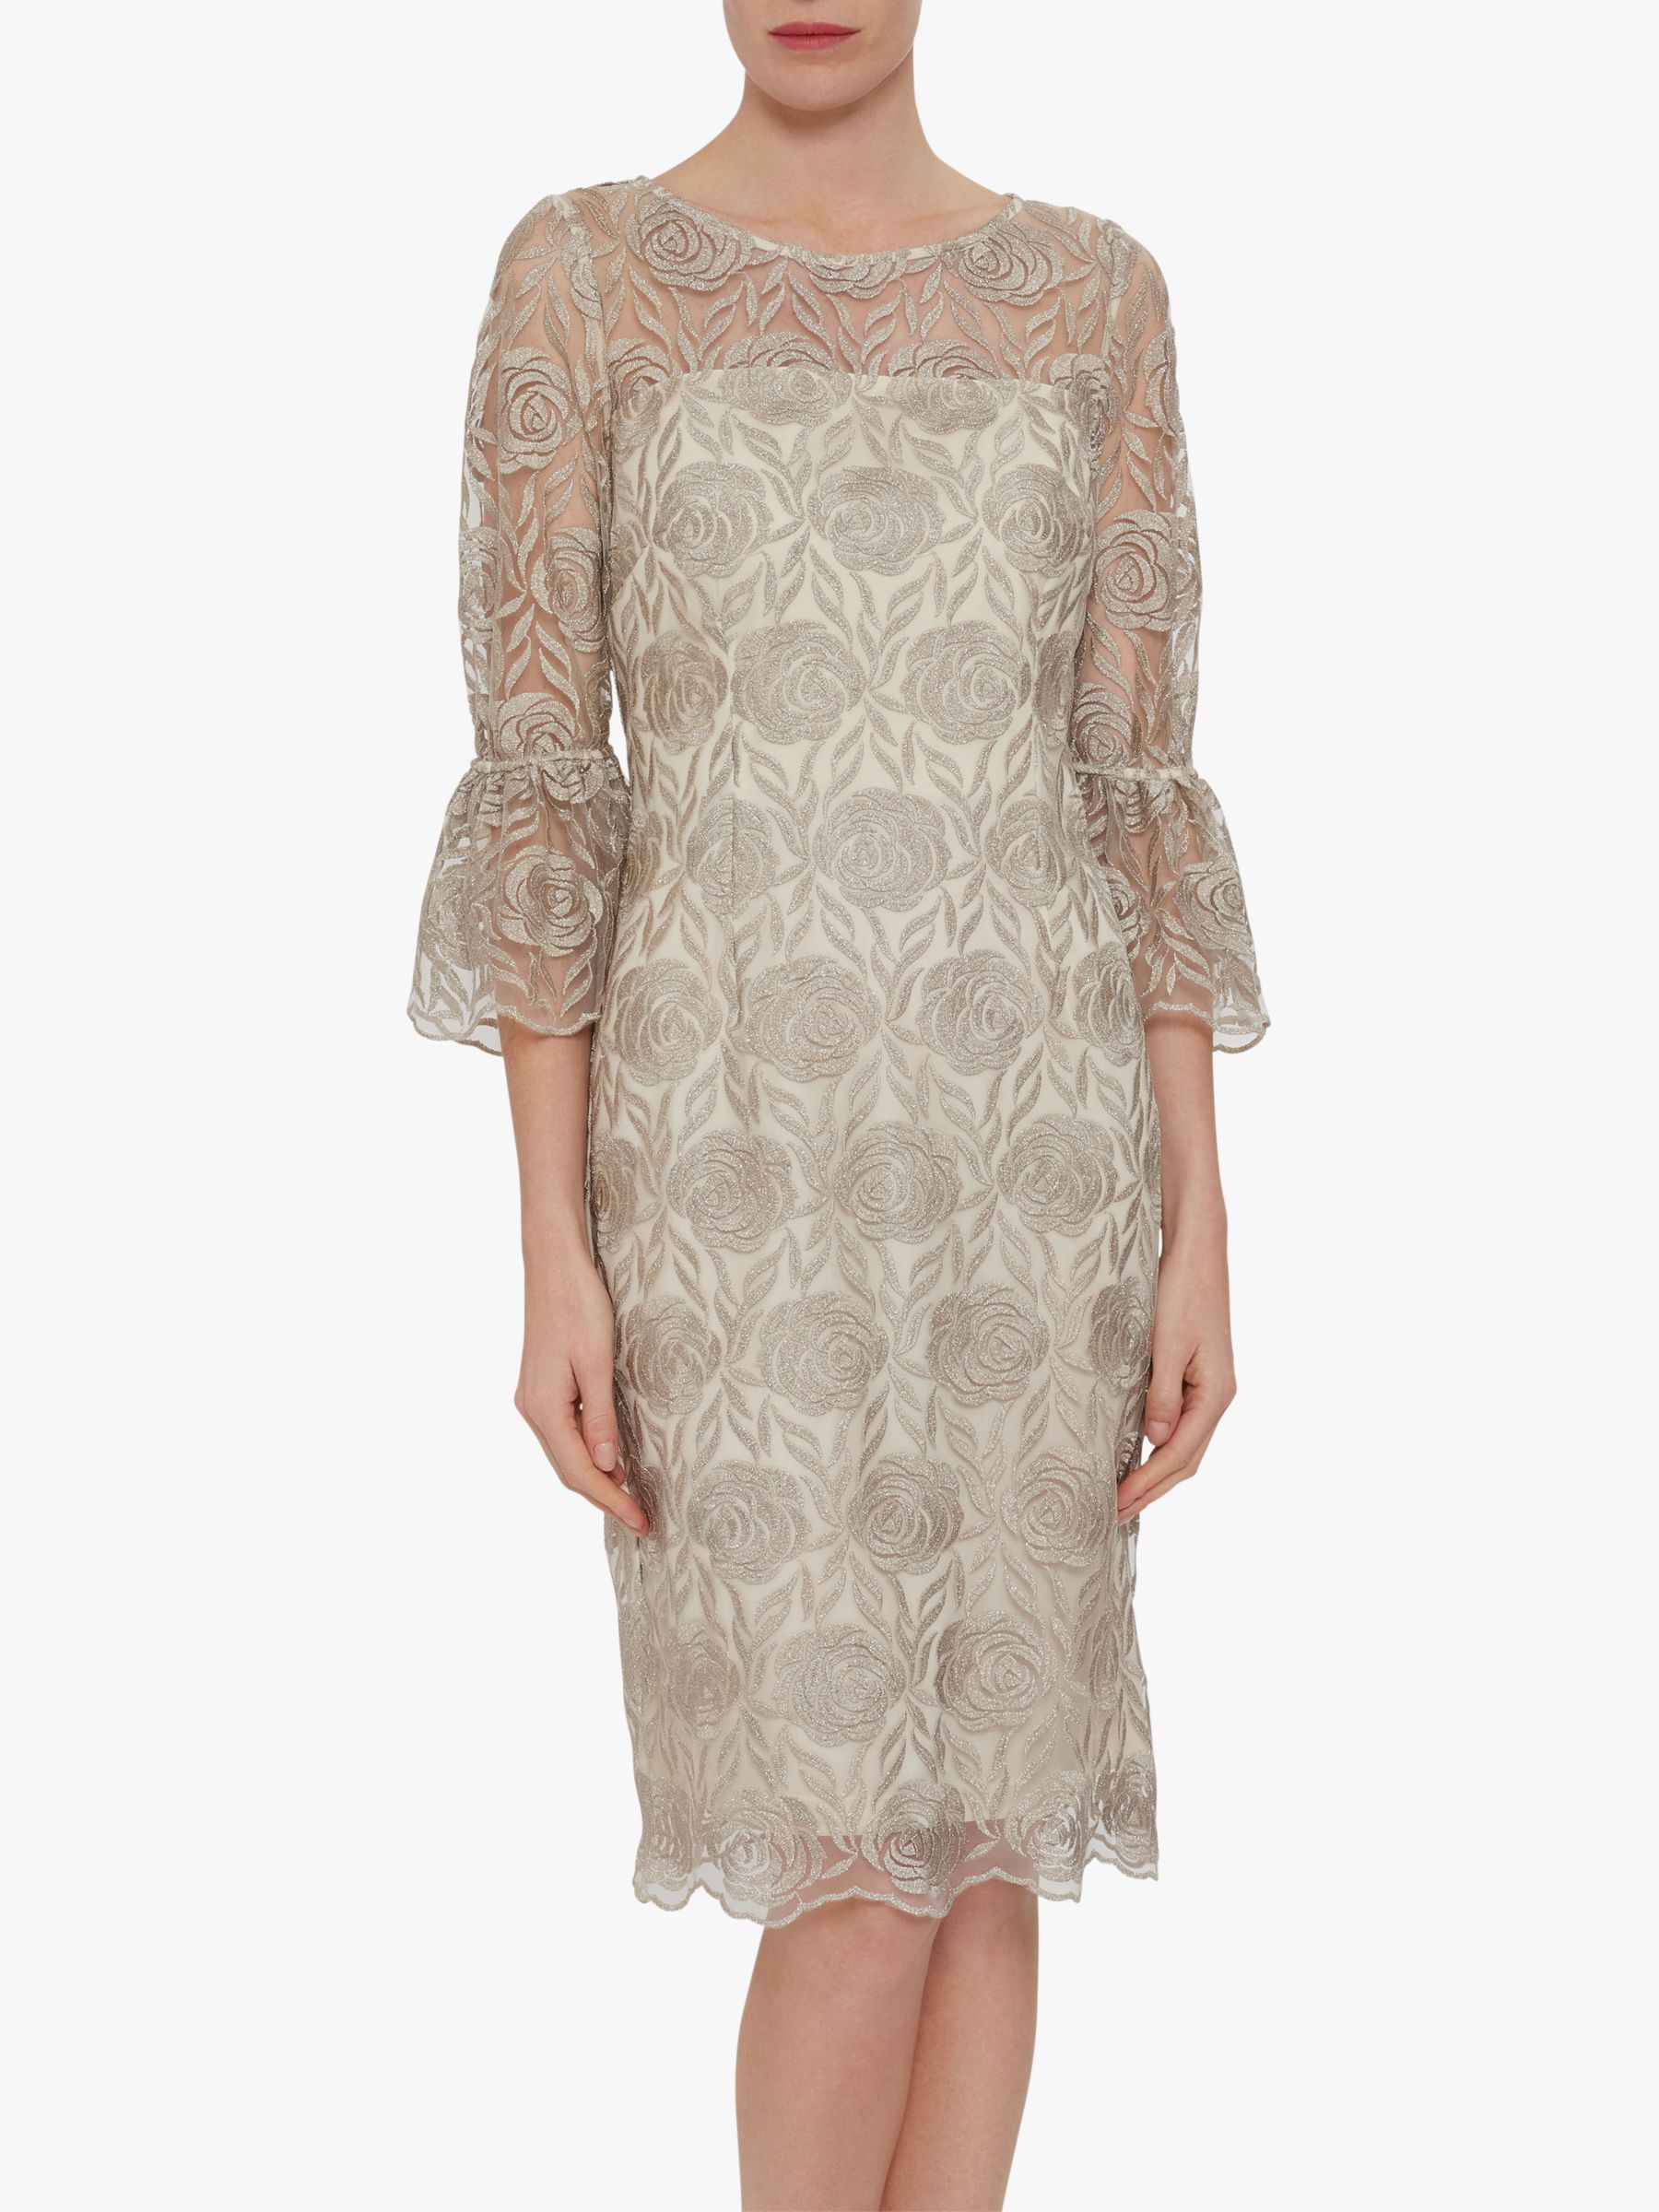 Gina Bacconi Theora Floral Dress, Butter Cream at John Lewis & Partners